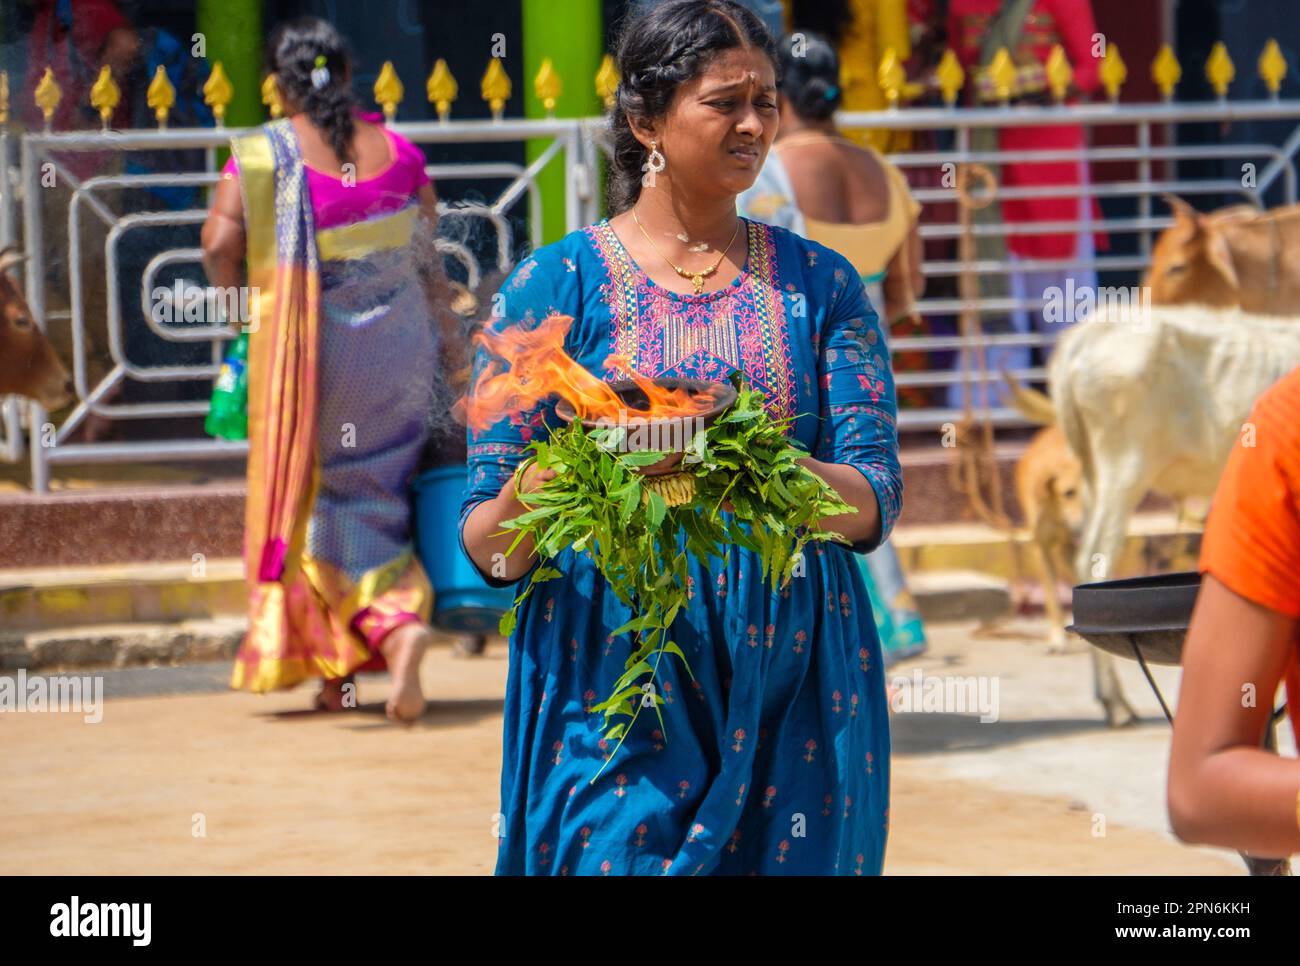 Devotee carrying a burning offering at a Hindu temple in the north of Sri Lanka Stock Photo